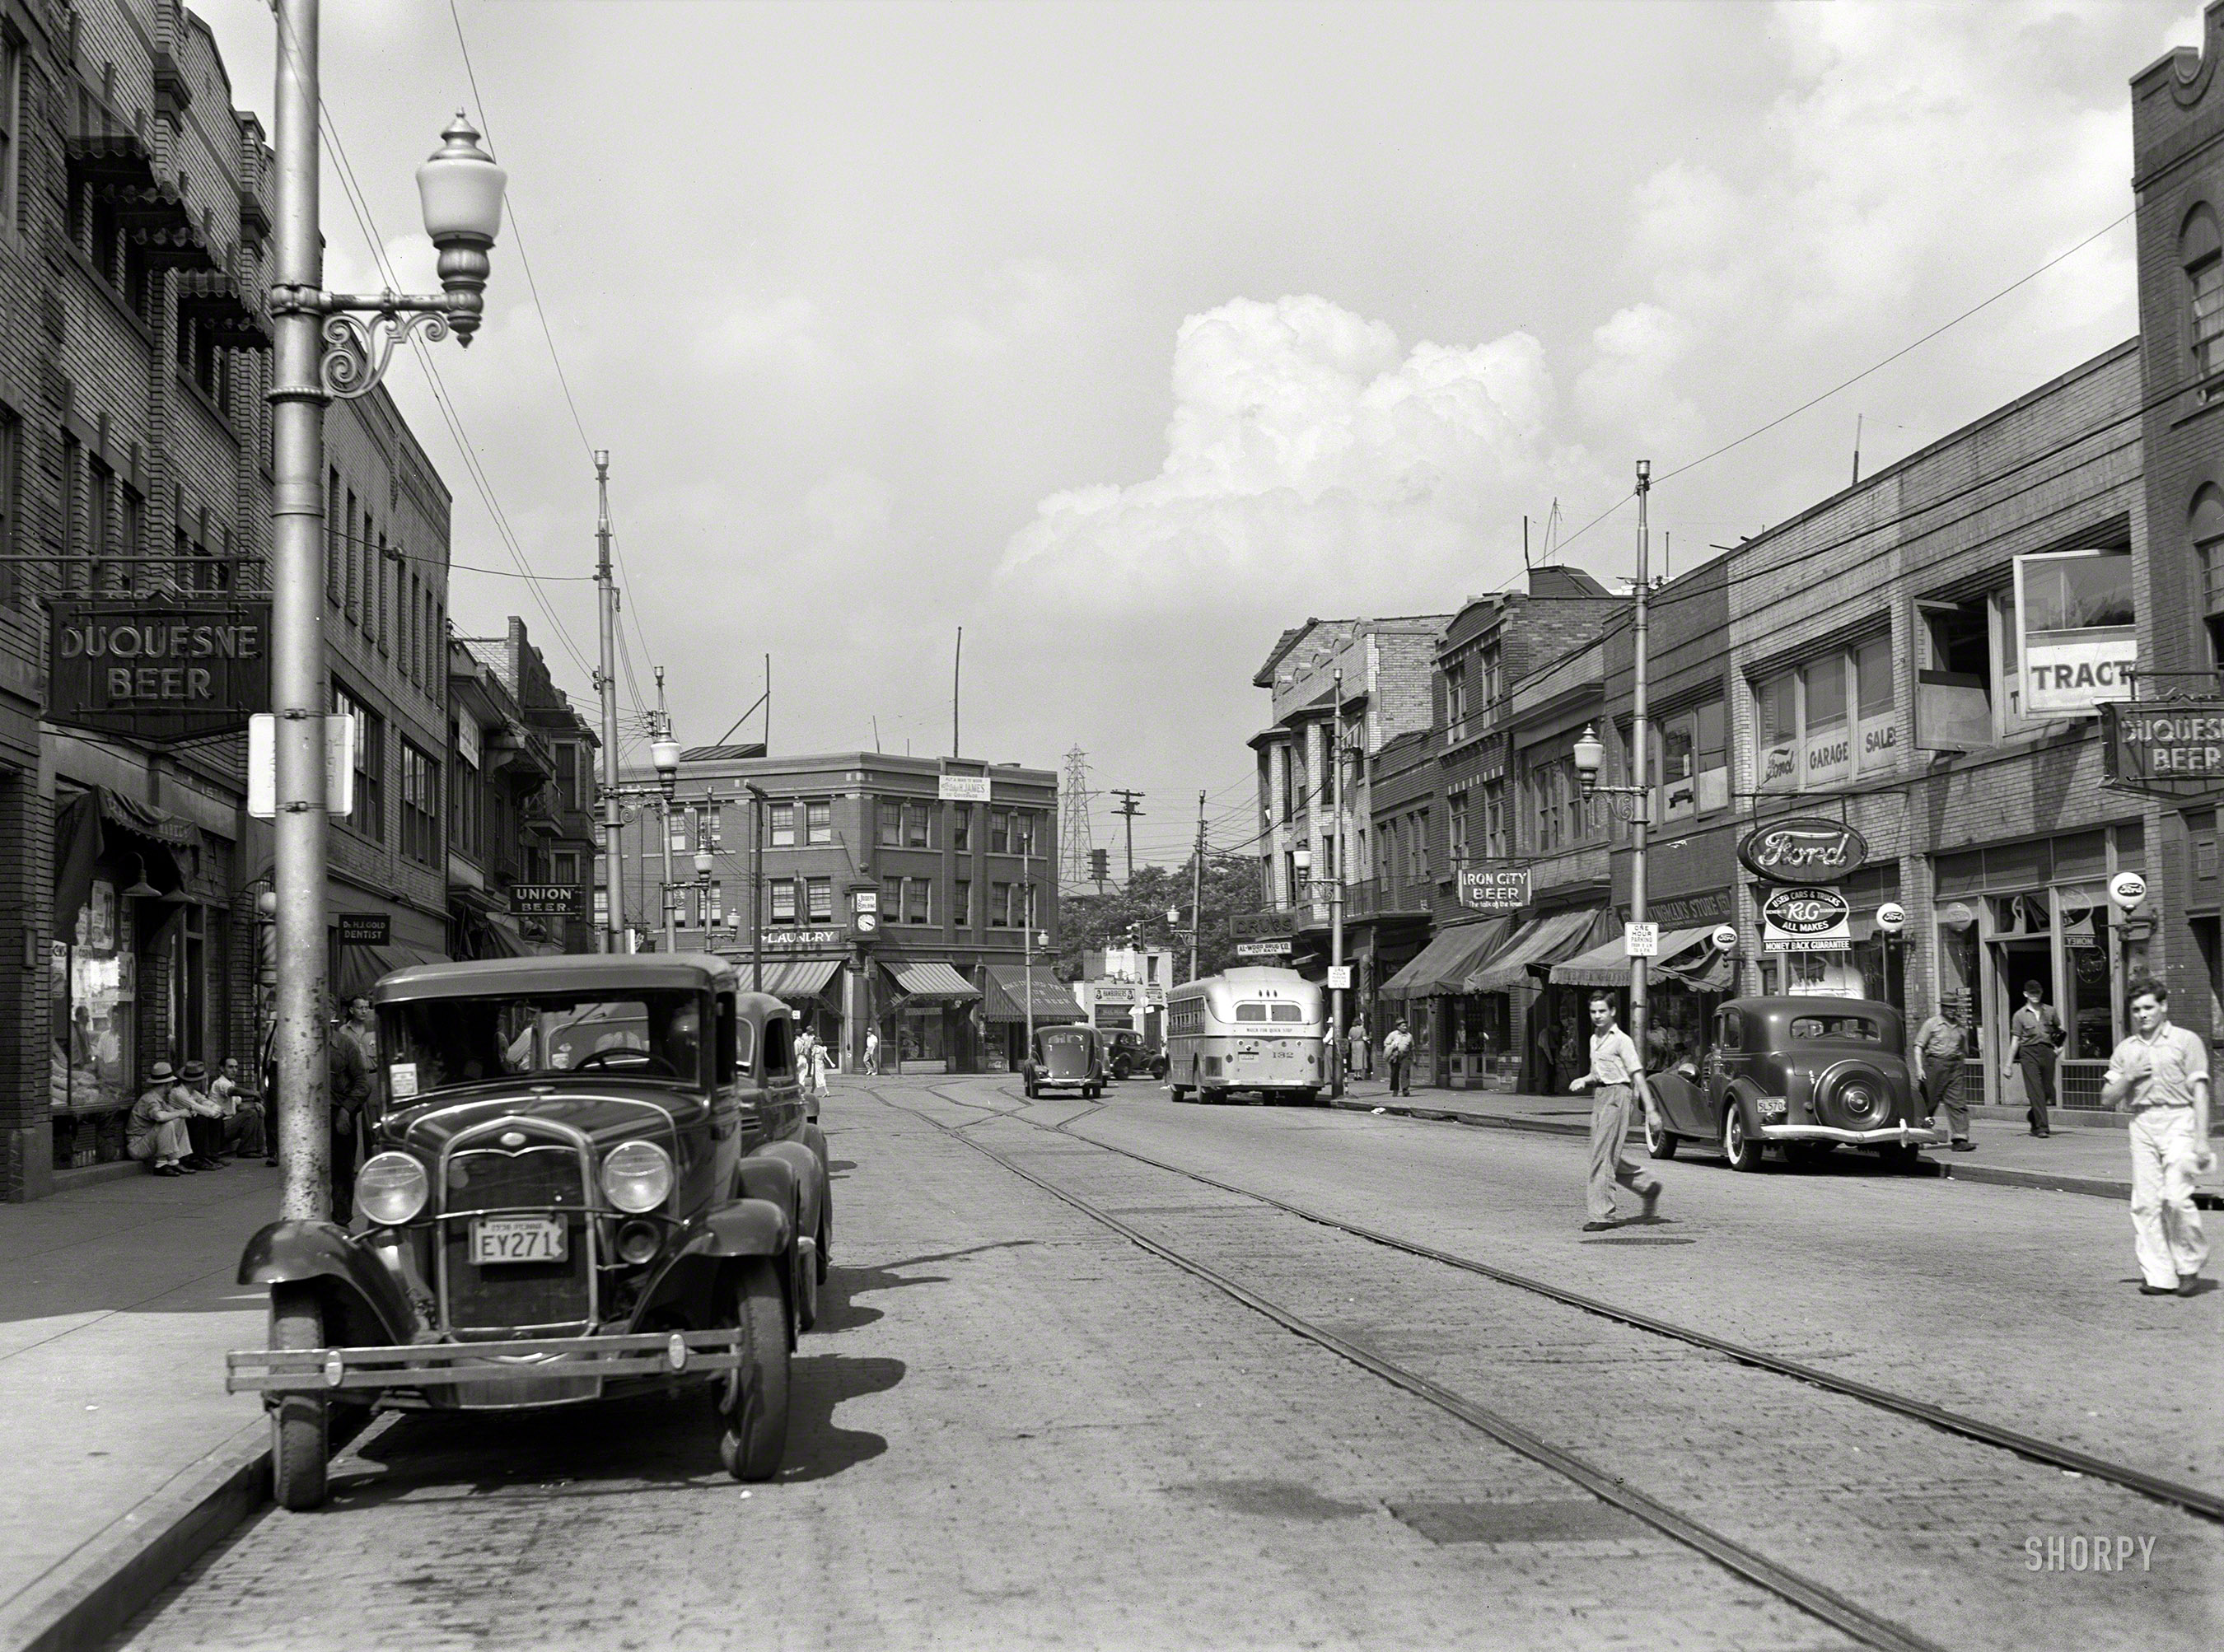 July 1938. "Main street (Franklin Avenue) in Aliquippa, Pennsylvania." Which you don't even have to cross if you're in the mood for a Duquesne. (If you're thirsty for an Iron City or Union Beer, you might have to dodge some traffic.) Photo by Arthur Rothstein for the Farm Security Administration. View full size.